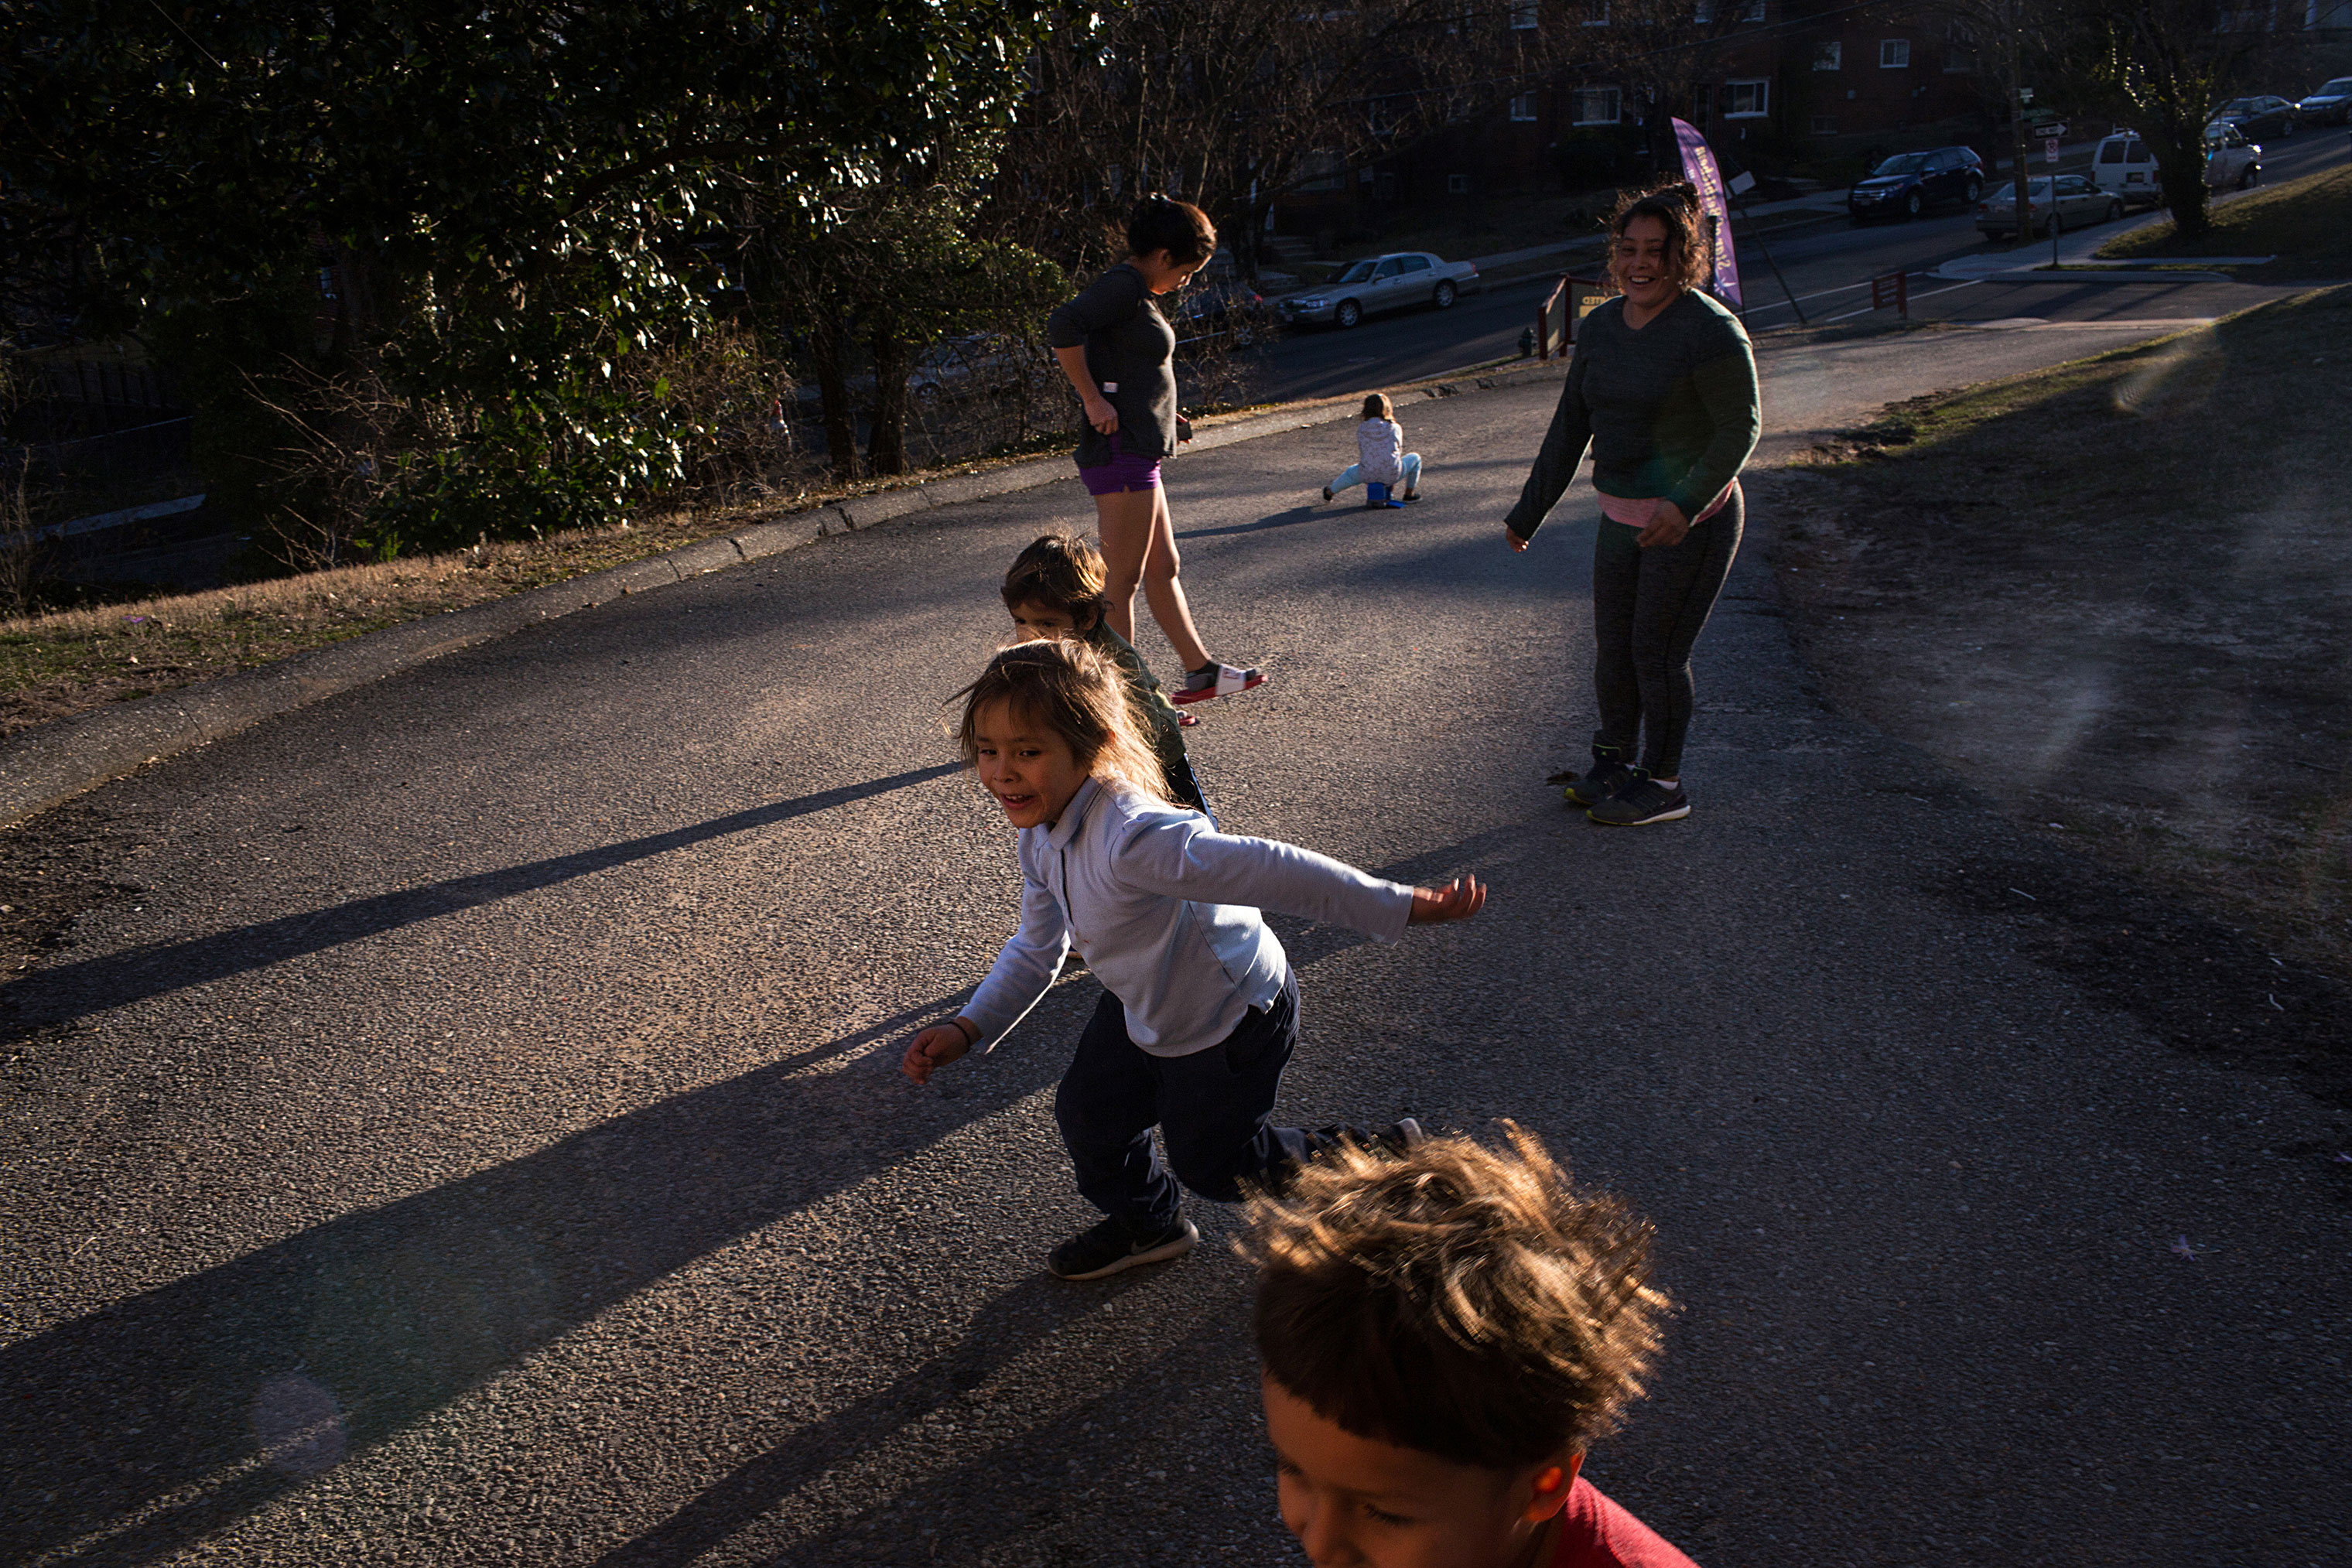 Maria, top-right, and Fanny play soccer with their respective children outside their house on March 12. (Federica Valabrega)